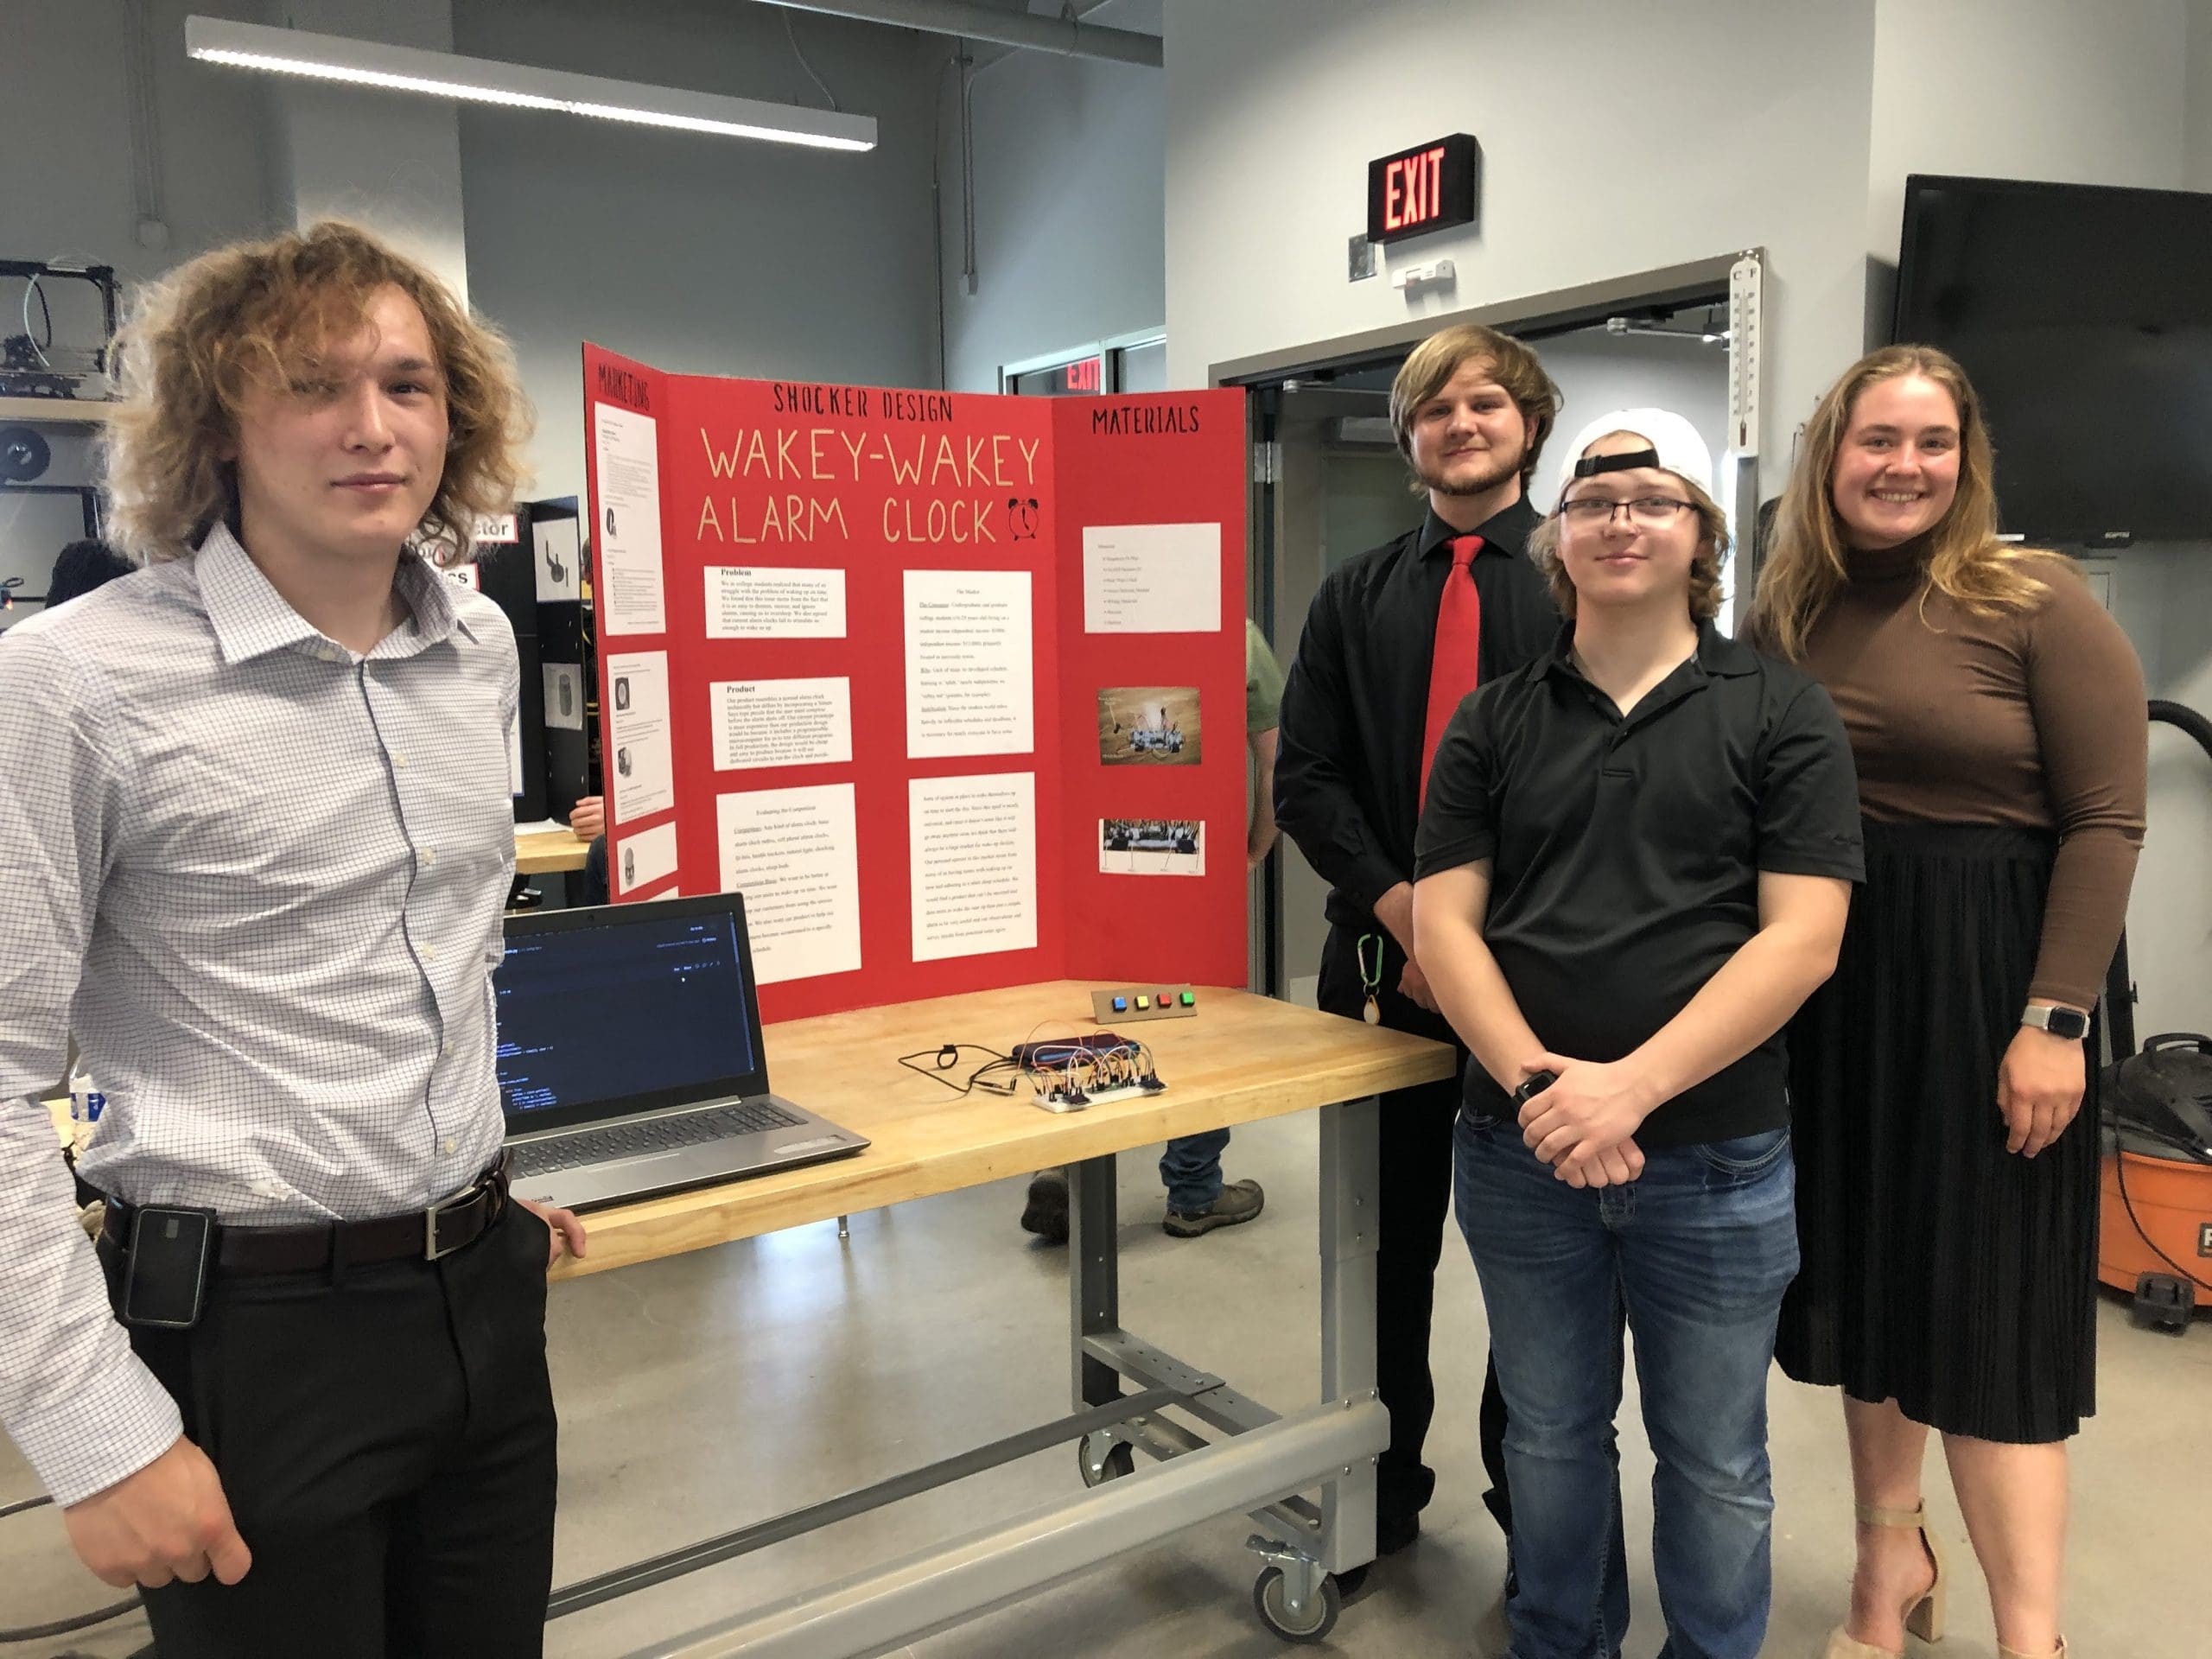 A group of four students smiling at the camera and dressed up to give an open house presentation of their alarm clock prototype. Their tri-fold board is red and titled Wakey Wakey Alarm Clock and details their desigin process.